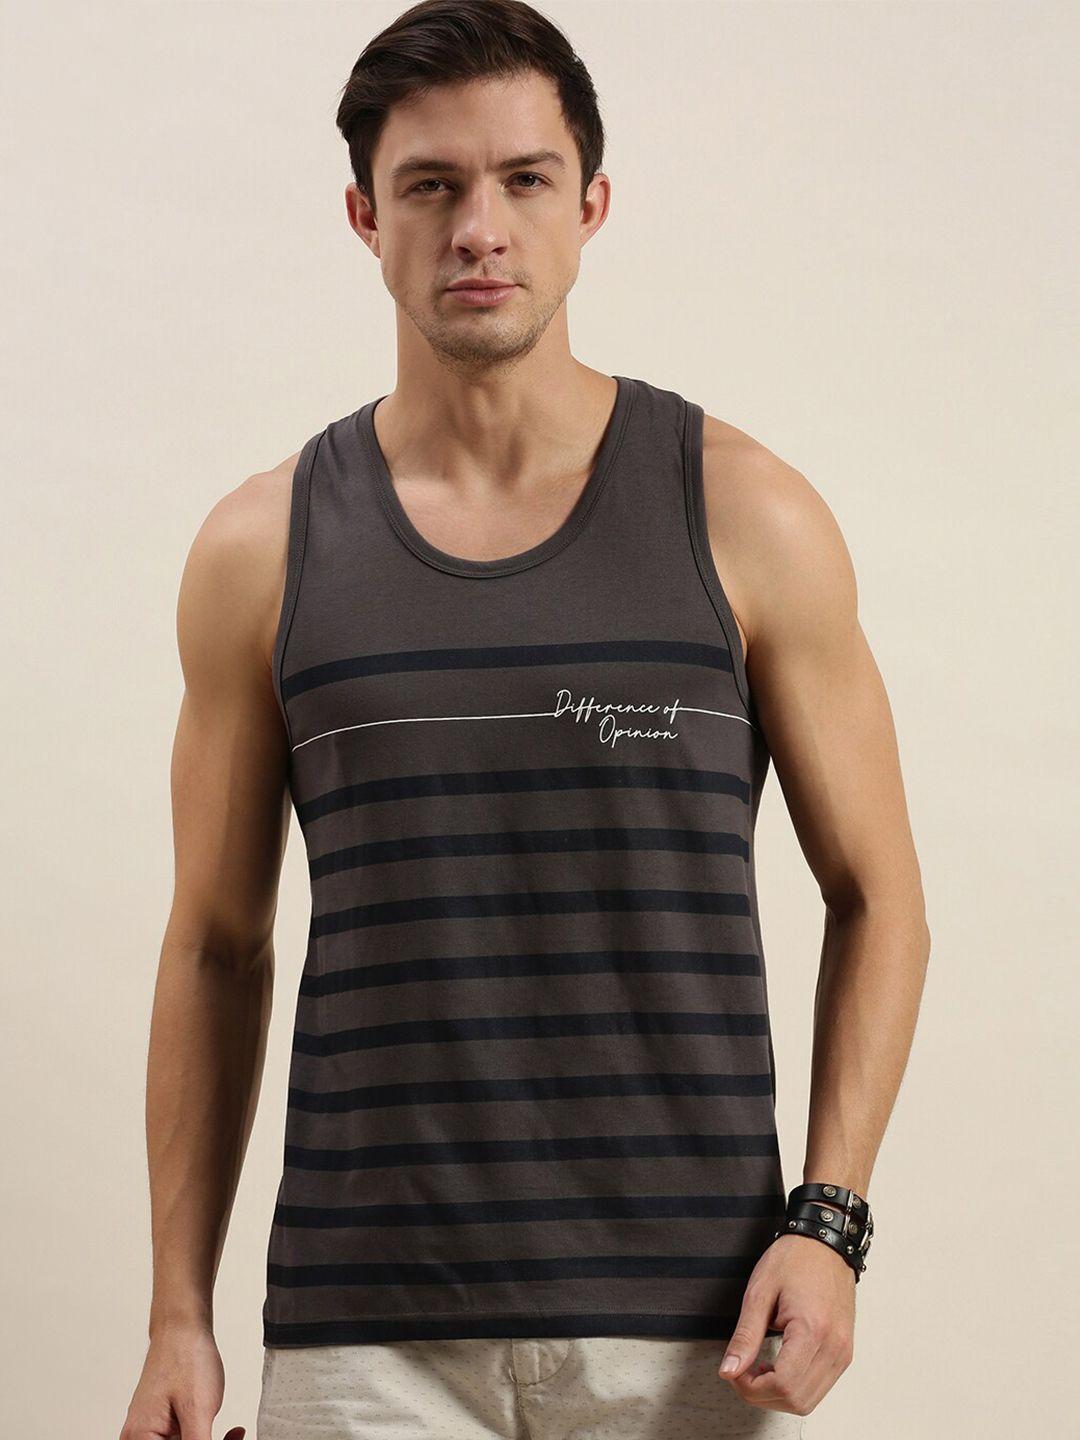 Difference of Opinion Men Grey & Black Striped T-shirt